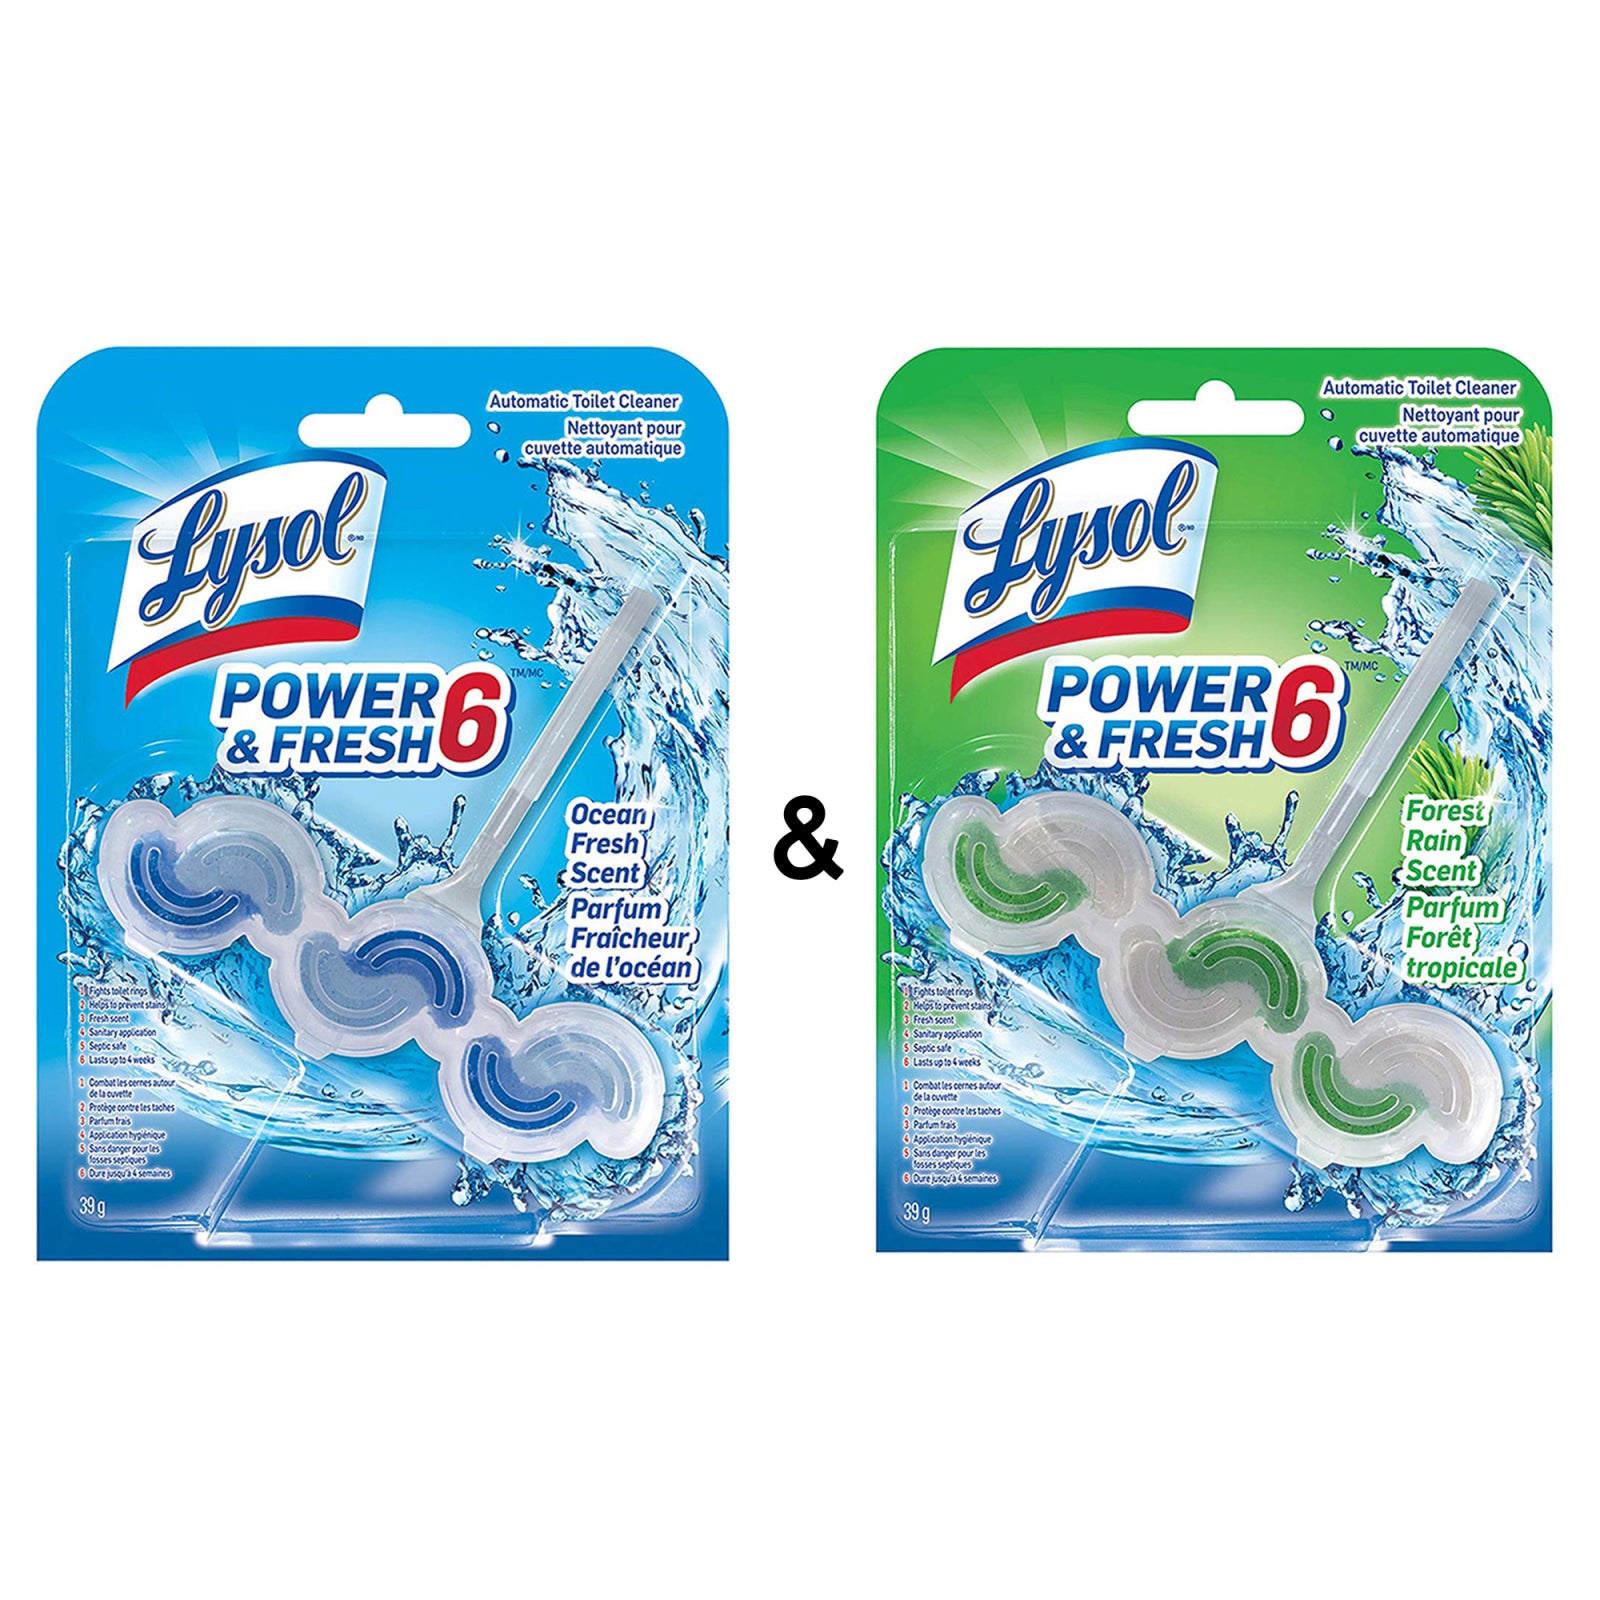 Lysol Power And Fresh 6 Automatic Toilet Bowl Cleaner Ocean Fresh 1 Count And Lysol Power And Fresh